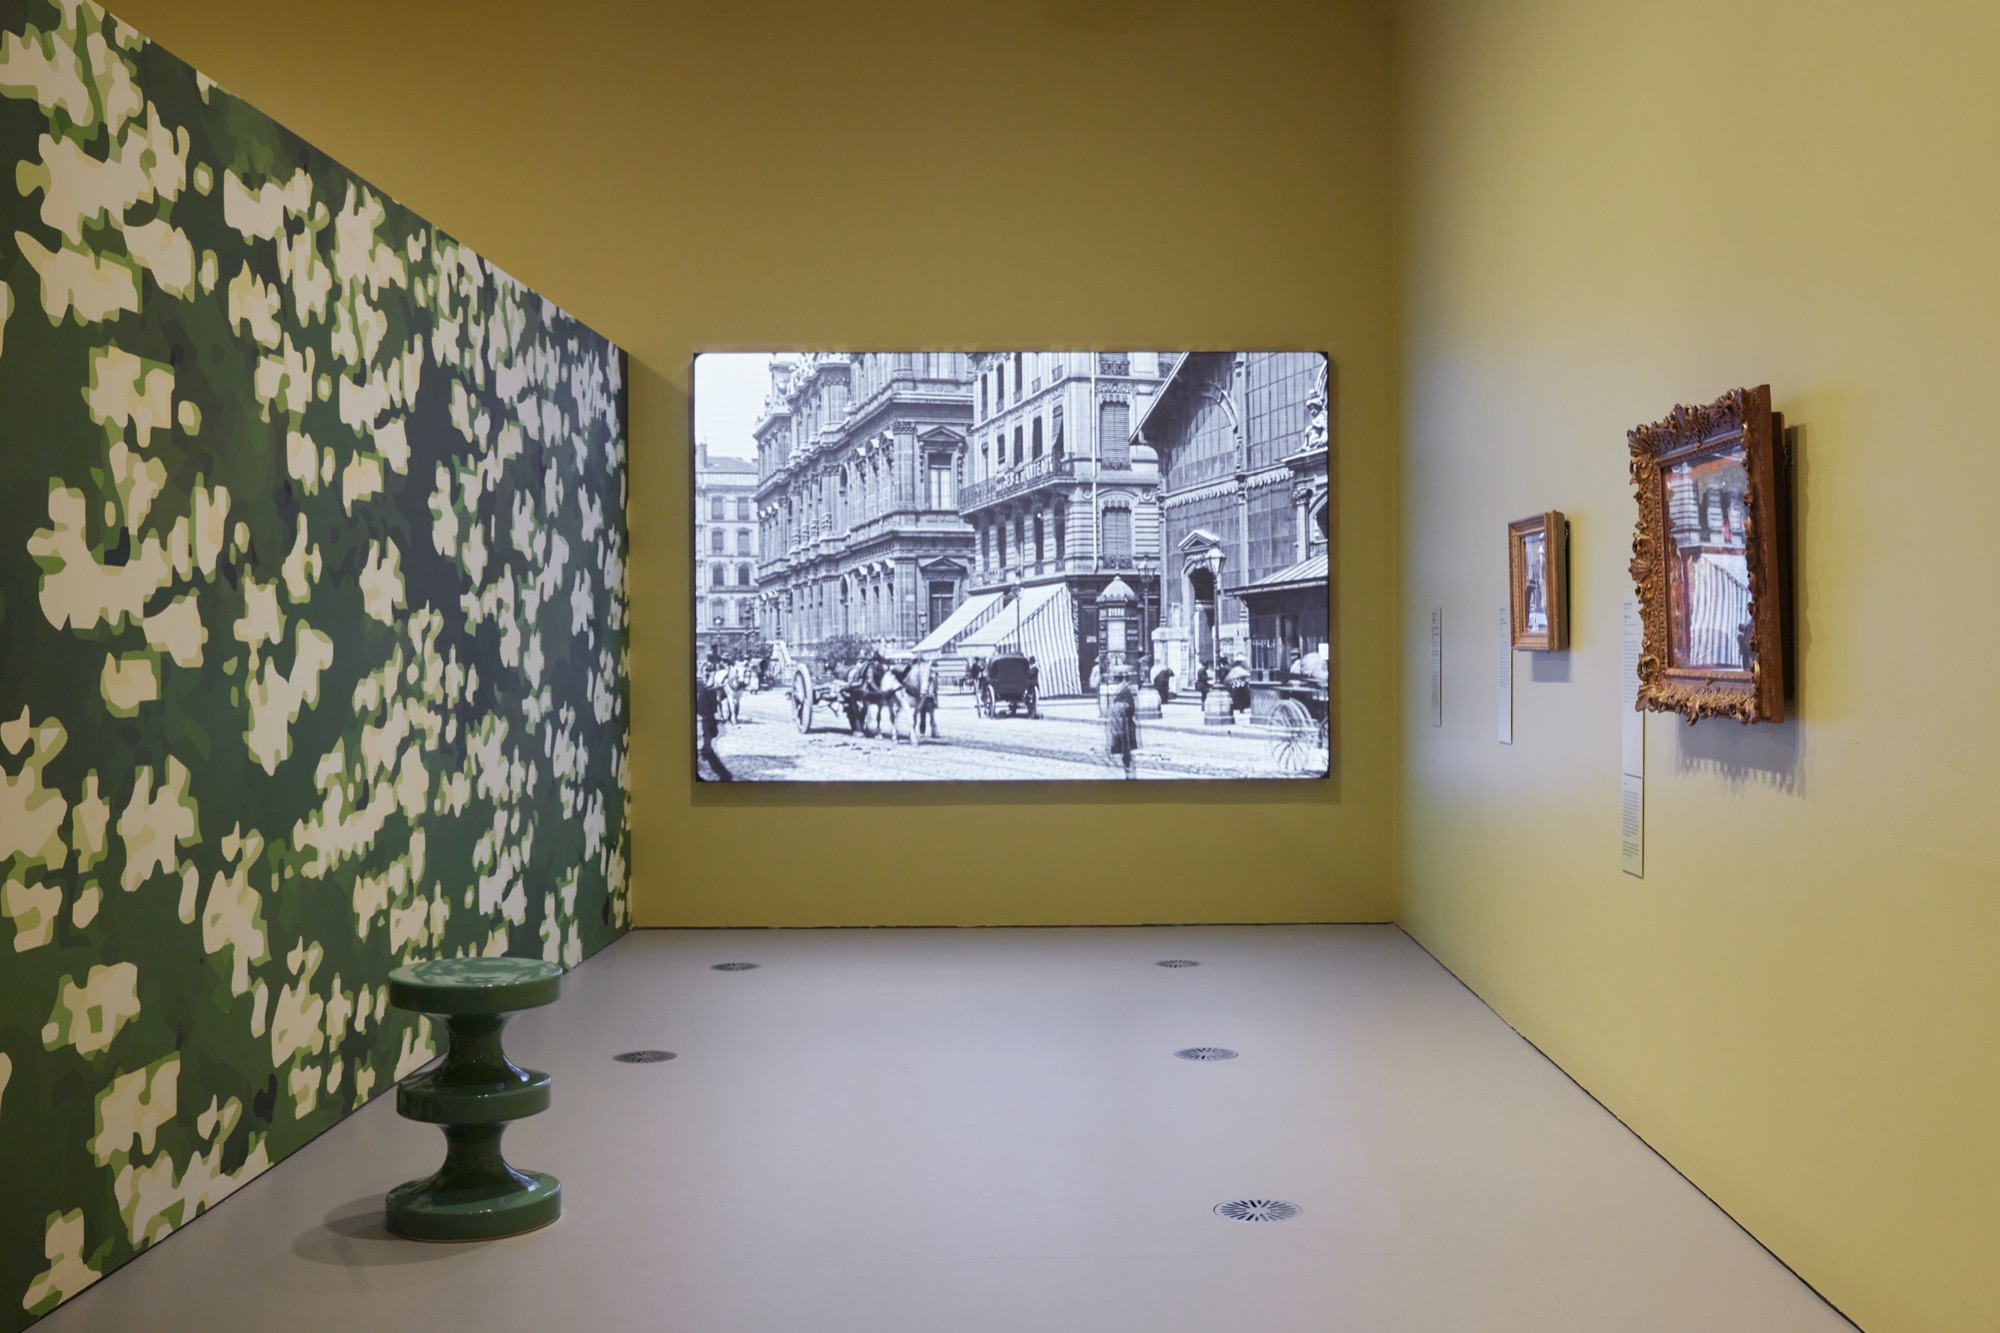 Installation view of Pierre Bonnard: Designed by India Mahdavi on display from 9 June – 8 October 2023 at NGV International, Melbourne. Photo: Lillie Thompson